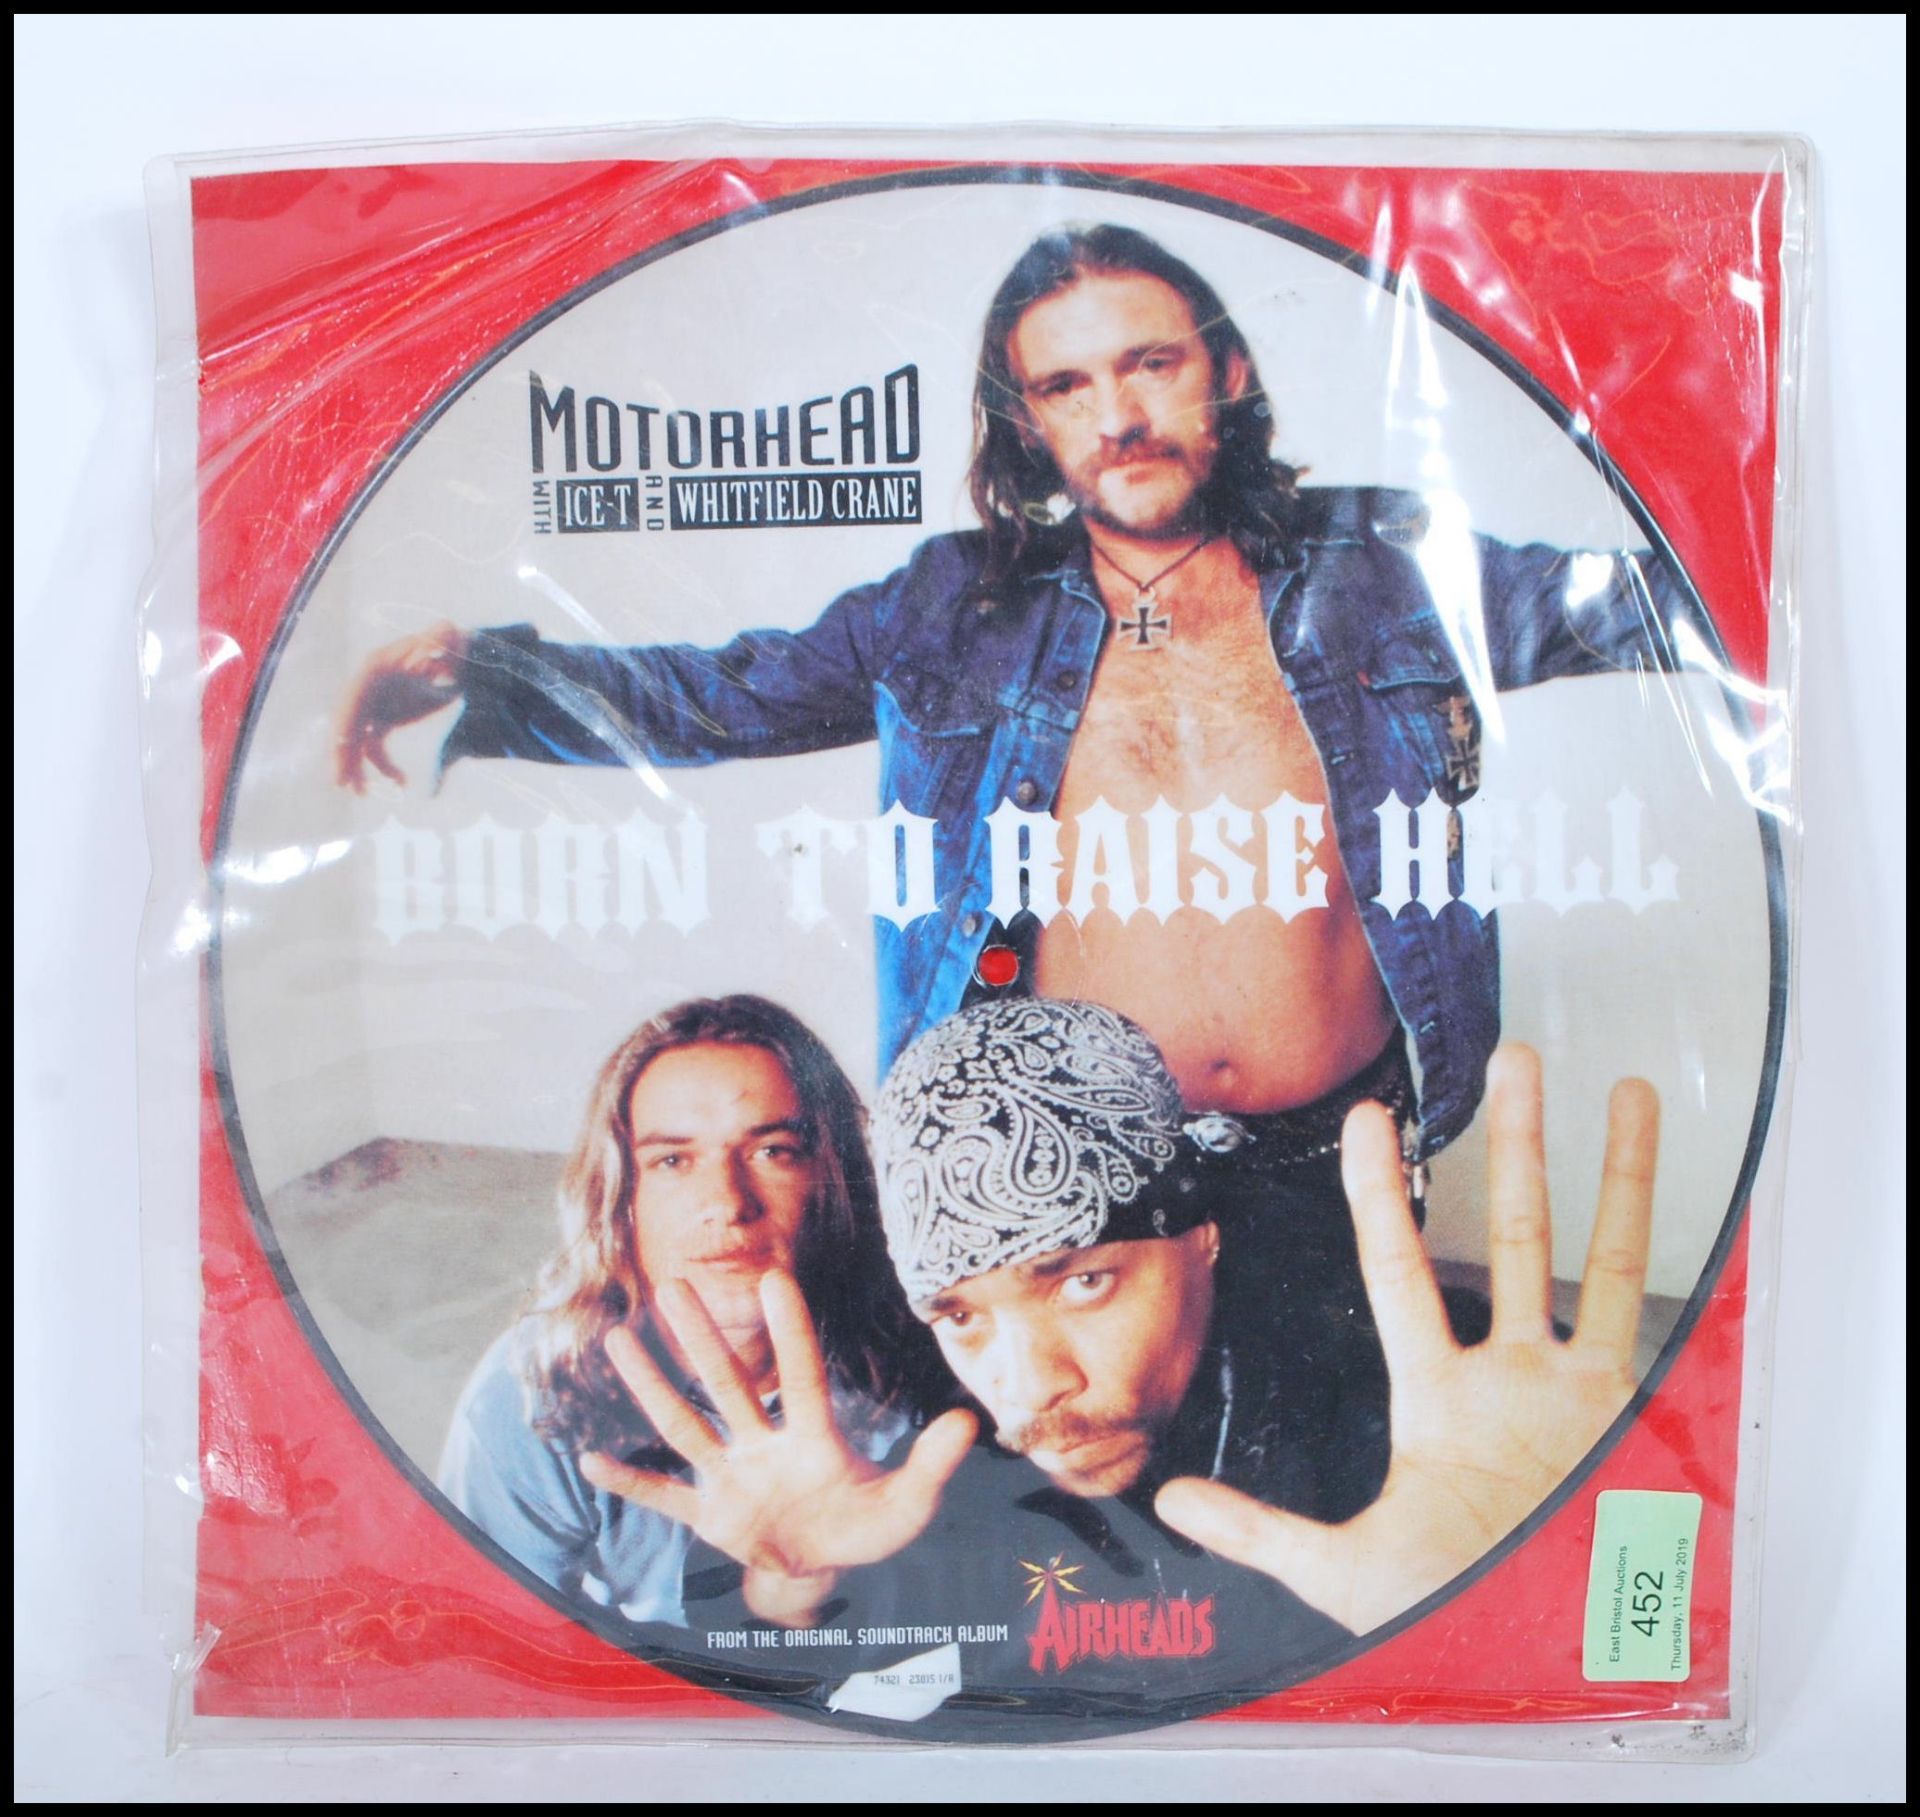 A Motorhead with Ice-T and Whitfield Crane ' Born to Raise Hell ' from the original soundtrack album